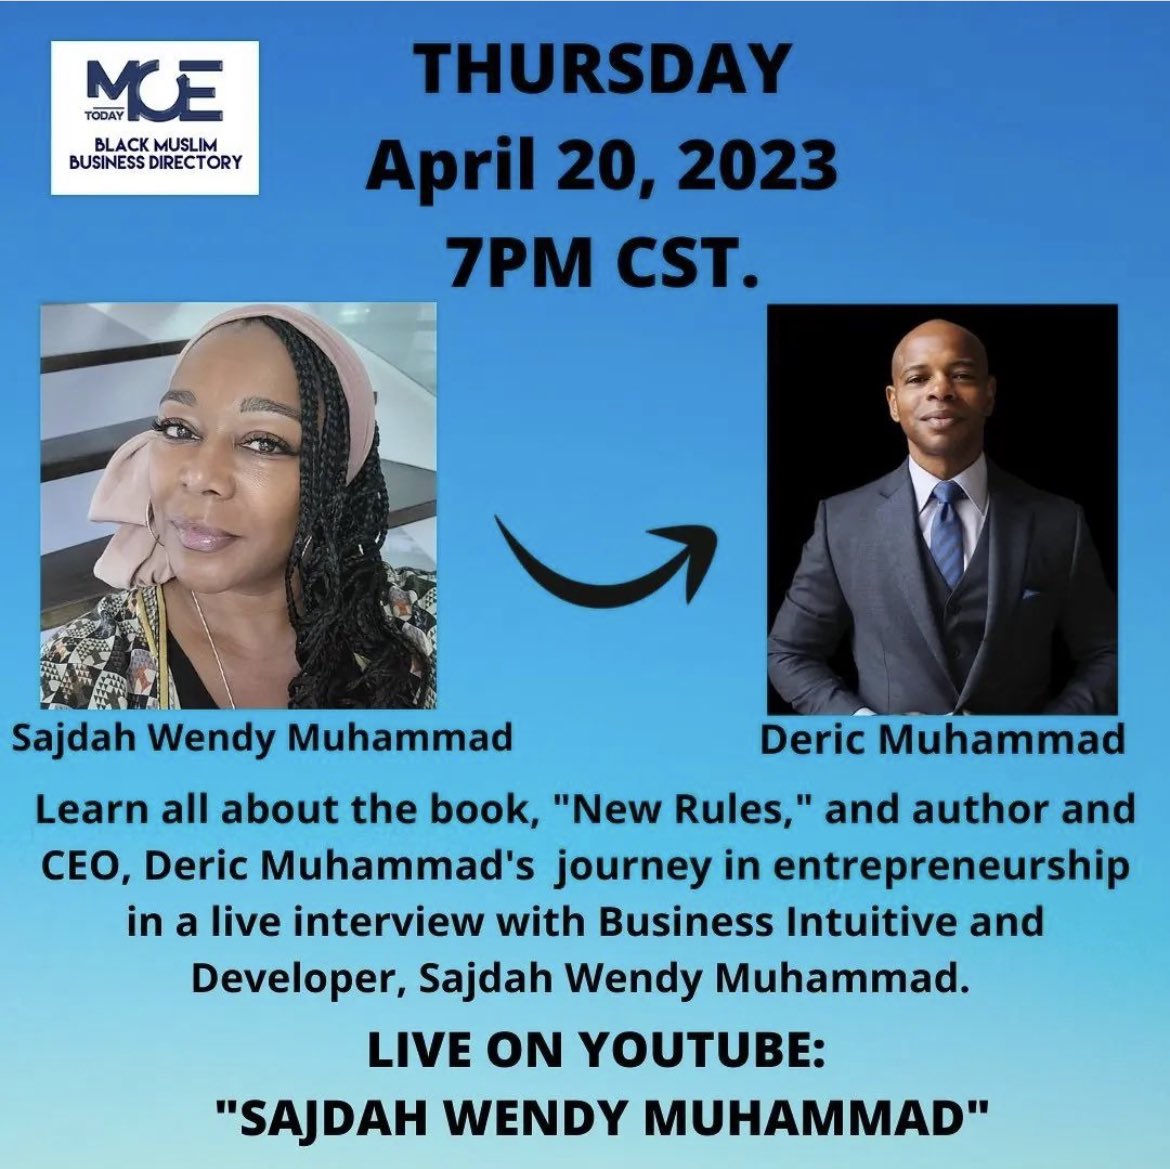 TONIGHT @ 7pm ~ I’m excited to join the one and only @sajdahwendymuhammad of @sajdahhouse on the @blackmuslimbusinesses talk show. We’ll be discussing business, economics, my journey into entrepreneurship and my new book “New Rules.” (LIVE VIA YOUTUBE!)

*see flyer for details